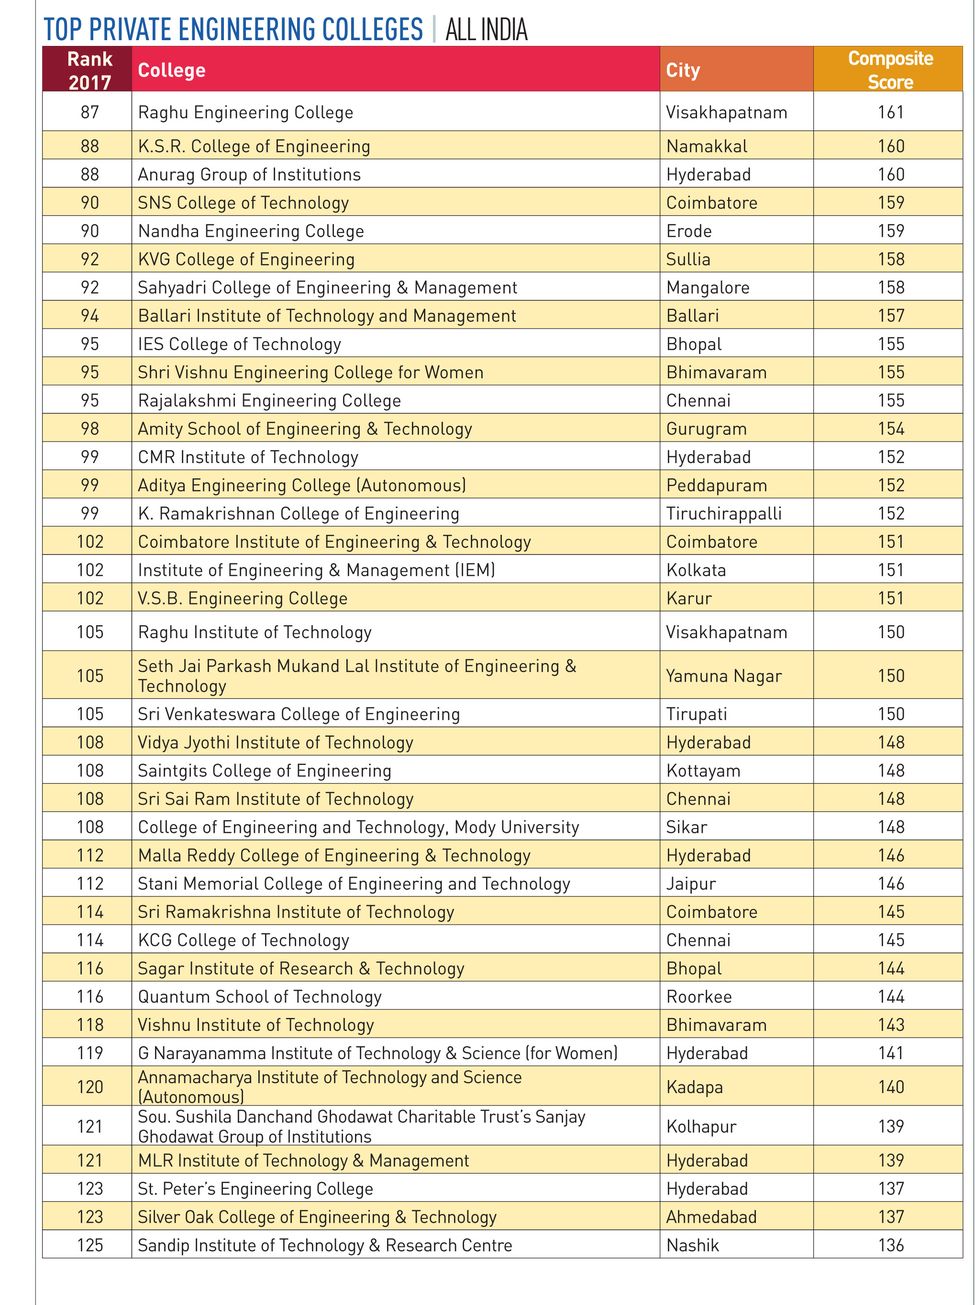 96-PRIVATE-ENGINEERING-COLLEGES